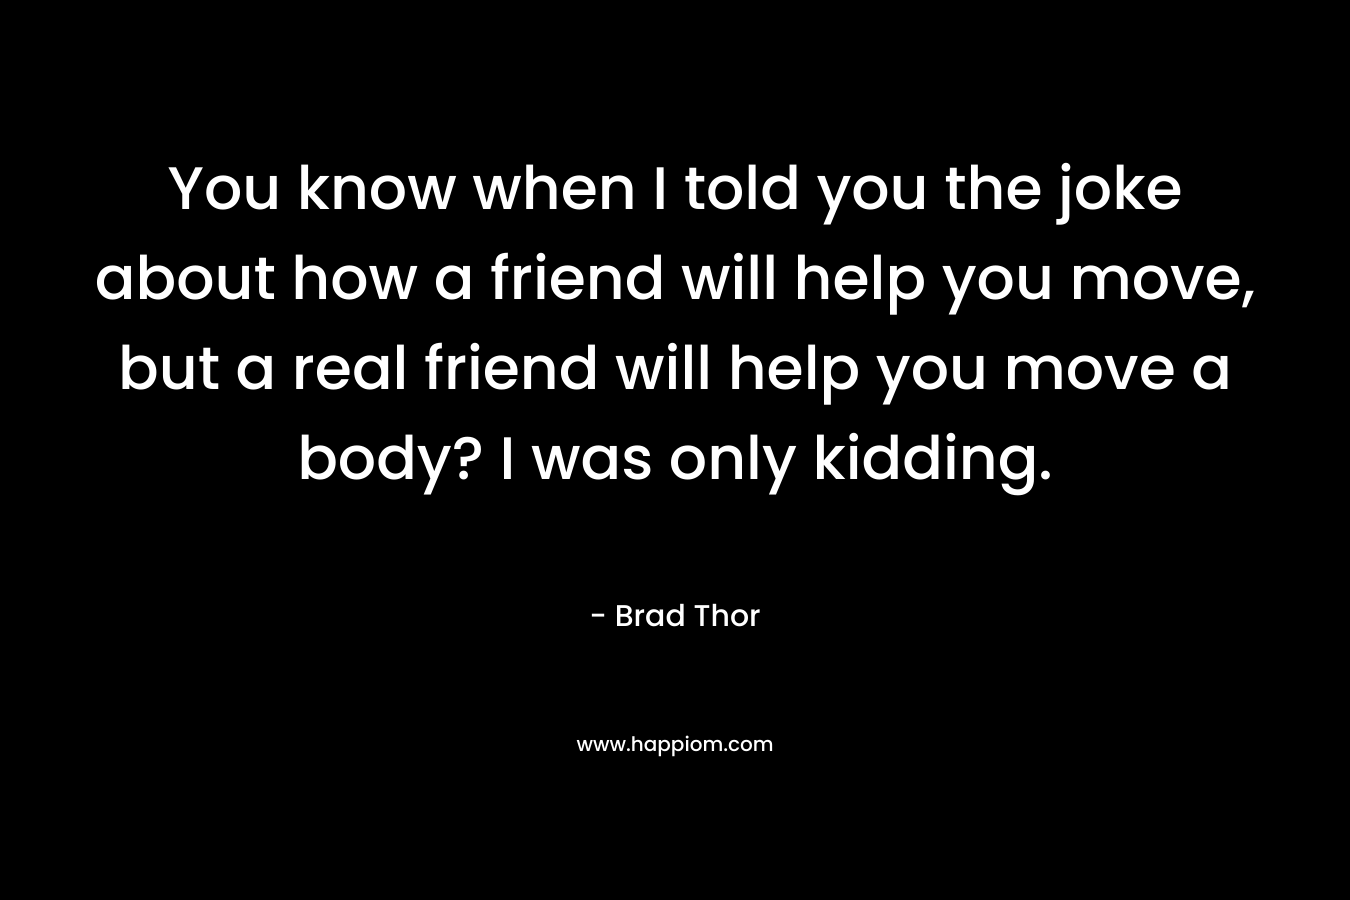 You know when I told you the joke about how a friend will help you move, but a real friend will help you move a body? I was only kidding. – Brad Thor